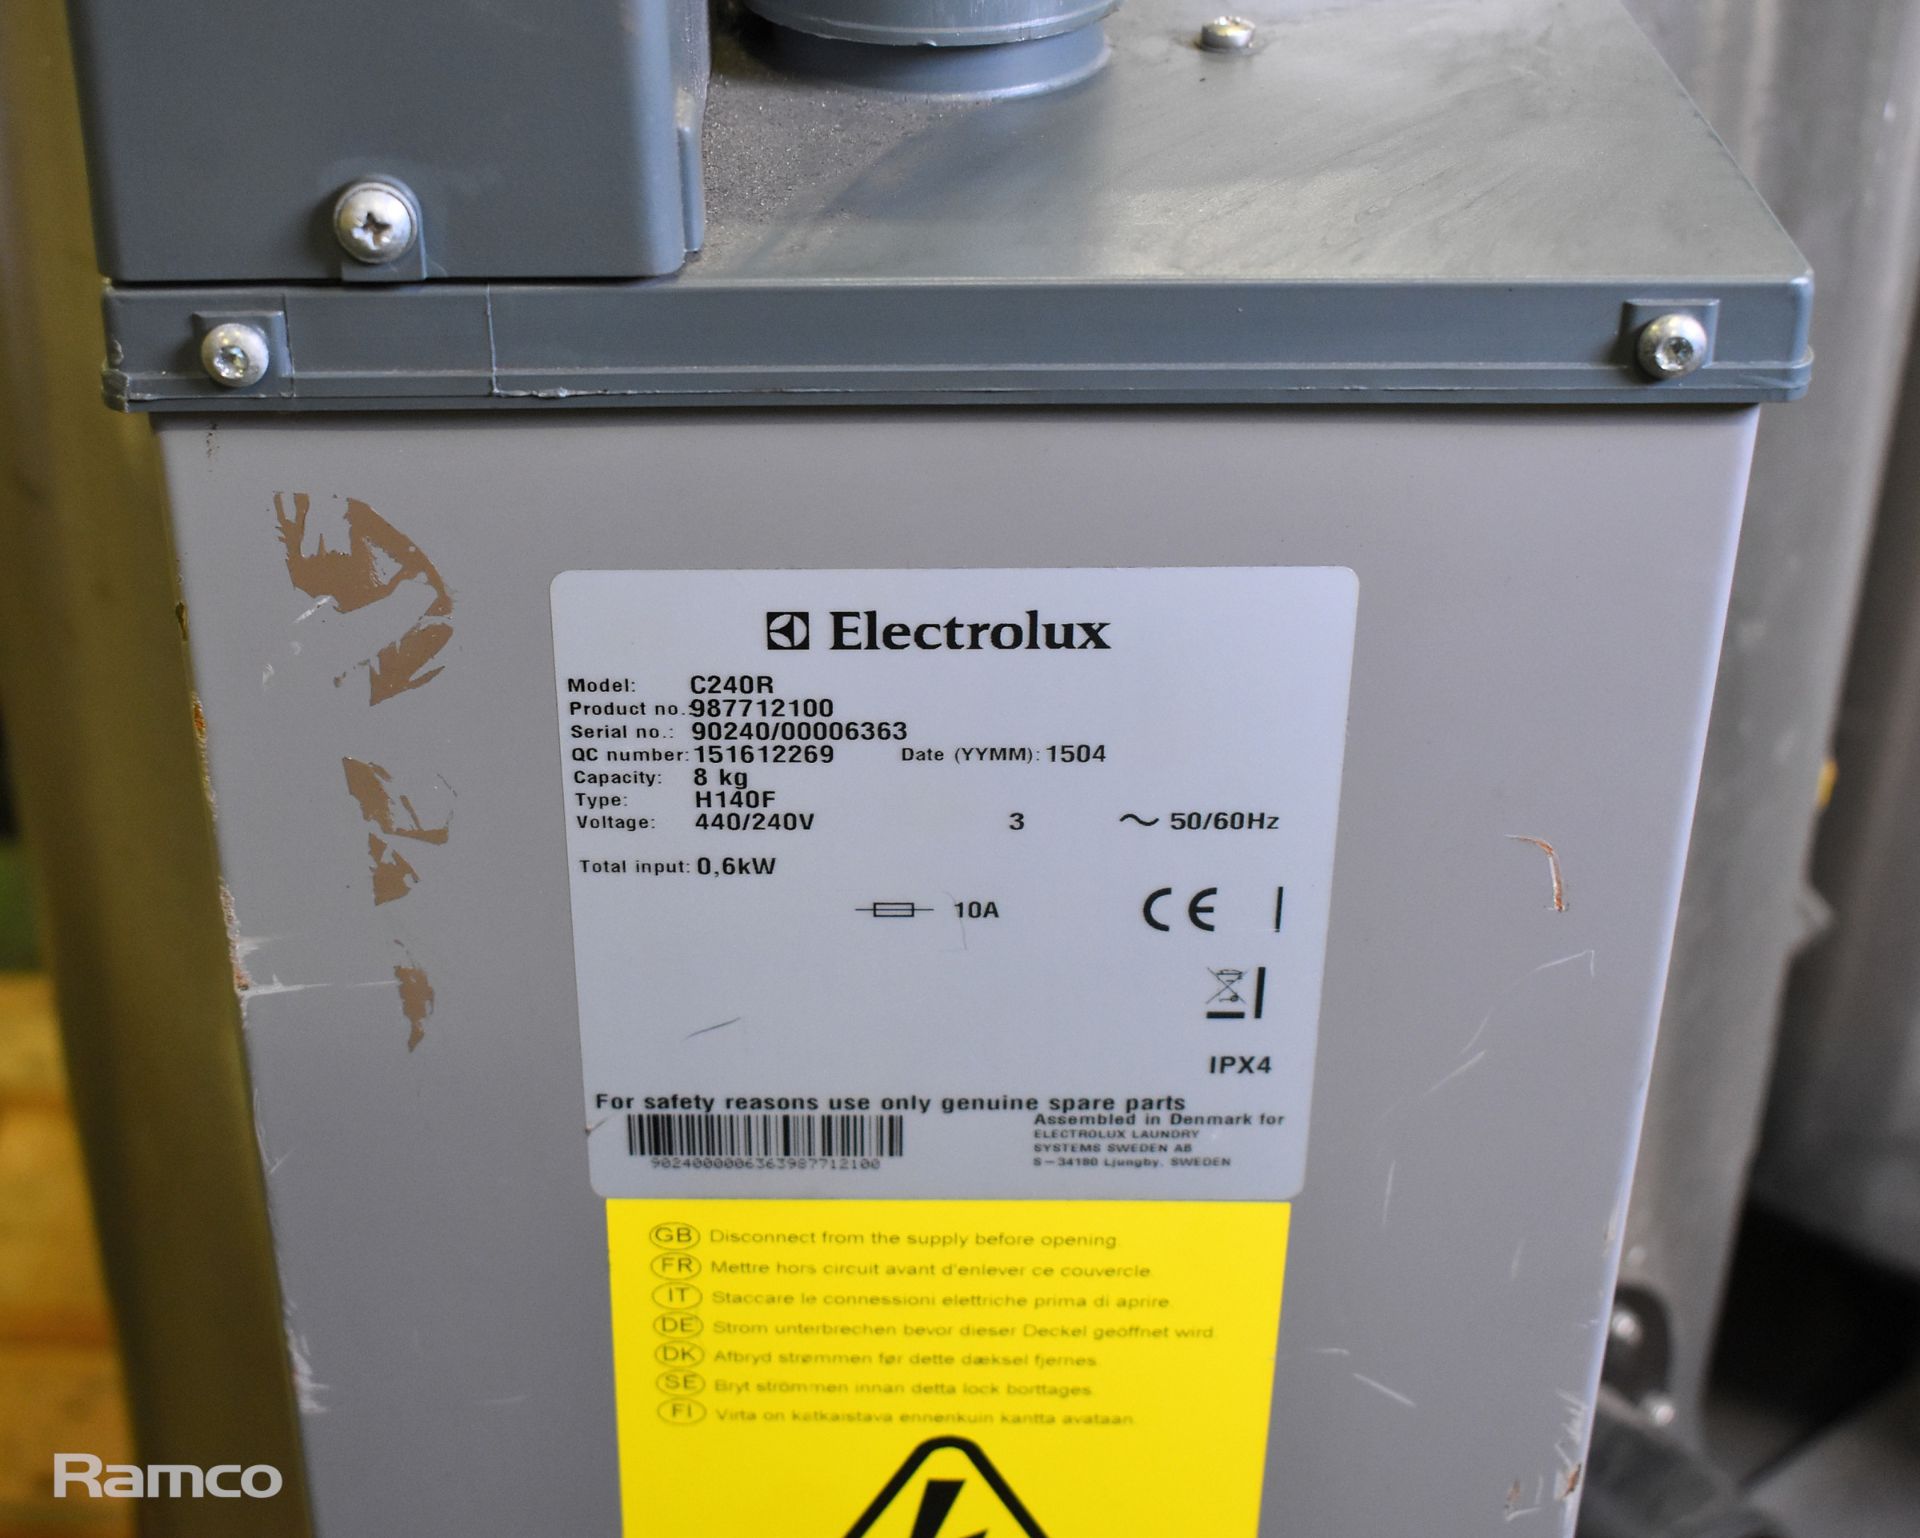 Electrolux C240R 8kg hydro extractor - W 515 x D 660 x H 910mm - Image 7 of 7